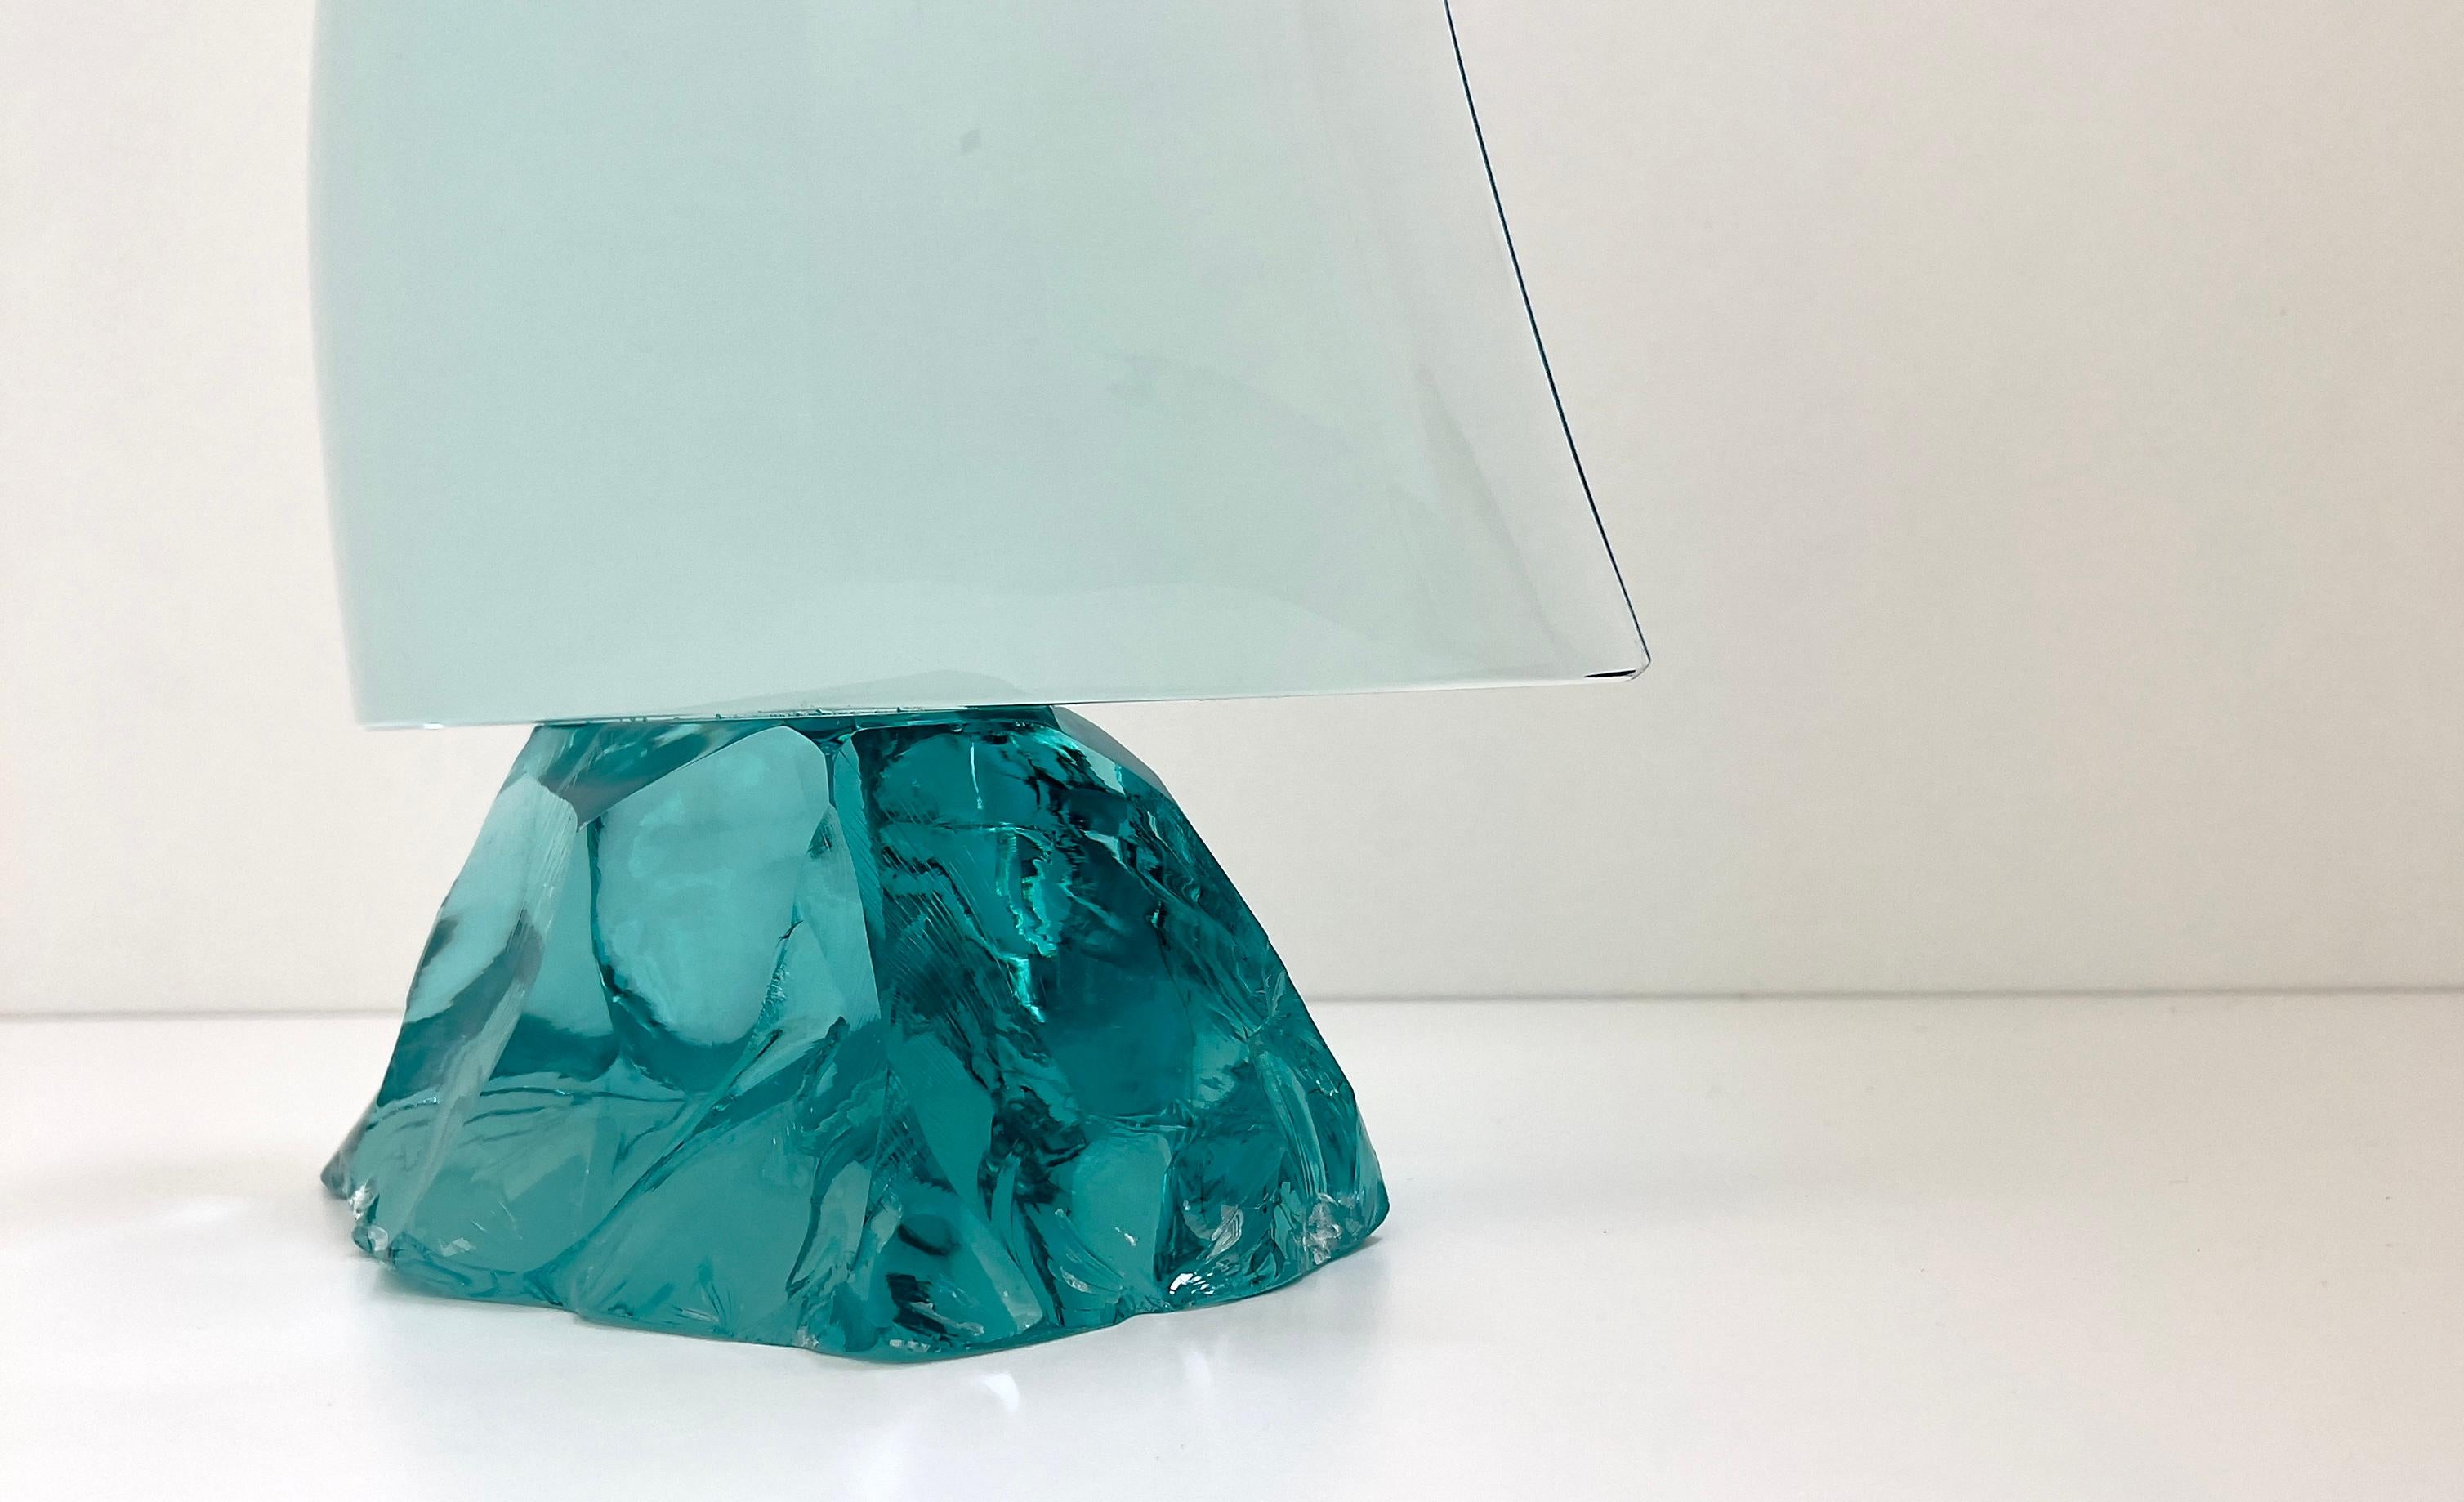 2023 Collection of decorative objects signed by Ghirò Studio (Milan).
The natural crystal has high transparencies with aquamarine reflections, it has been curved and handmade to represent a sail. Every sail is a real artistic sculpture. 
Each